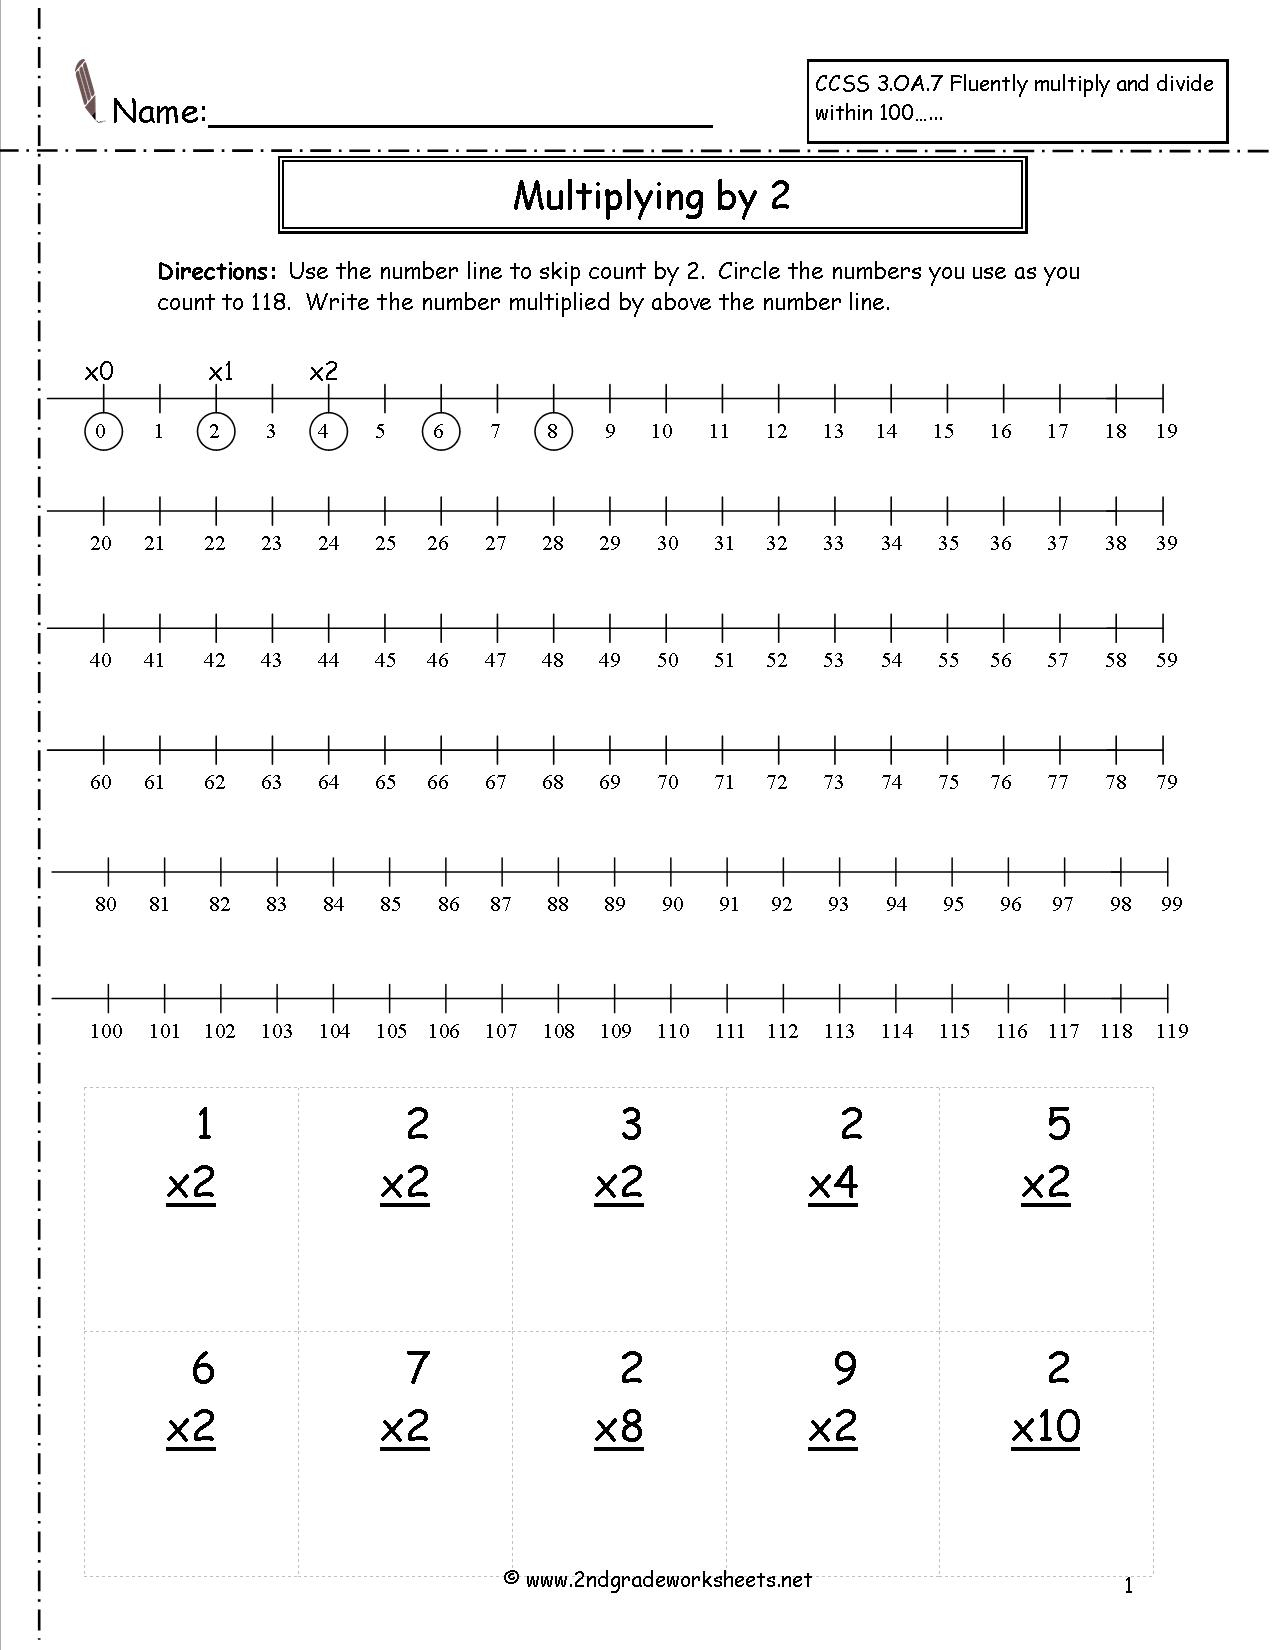 printable-multiplication-facts-worksheets